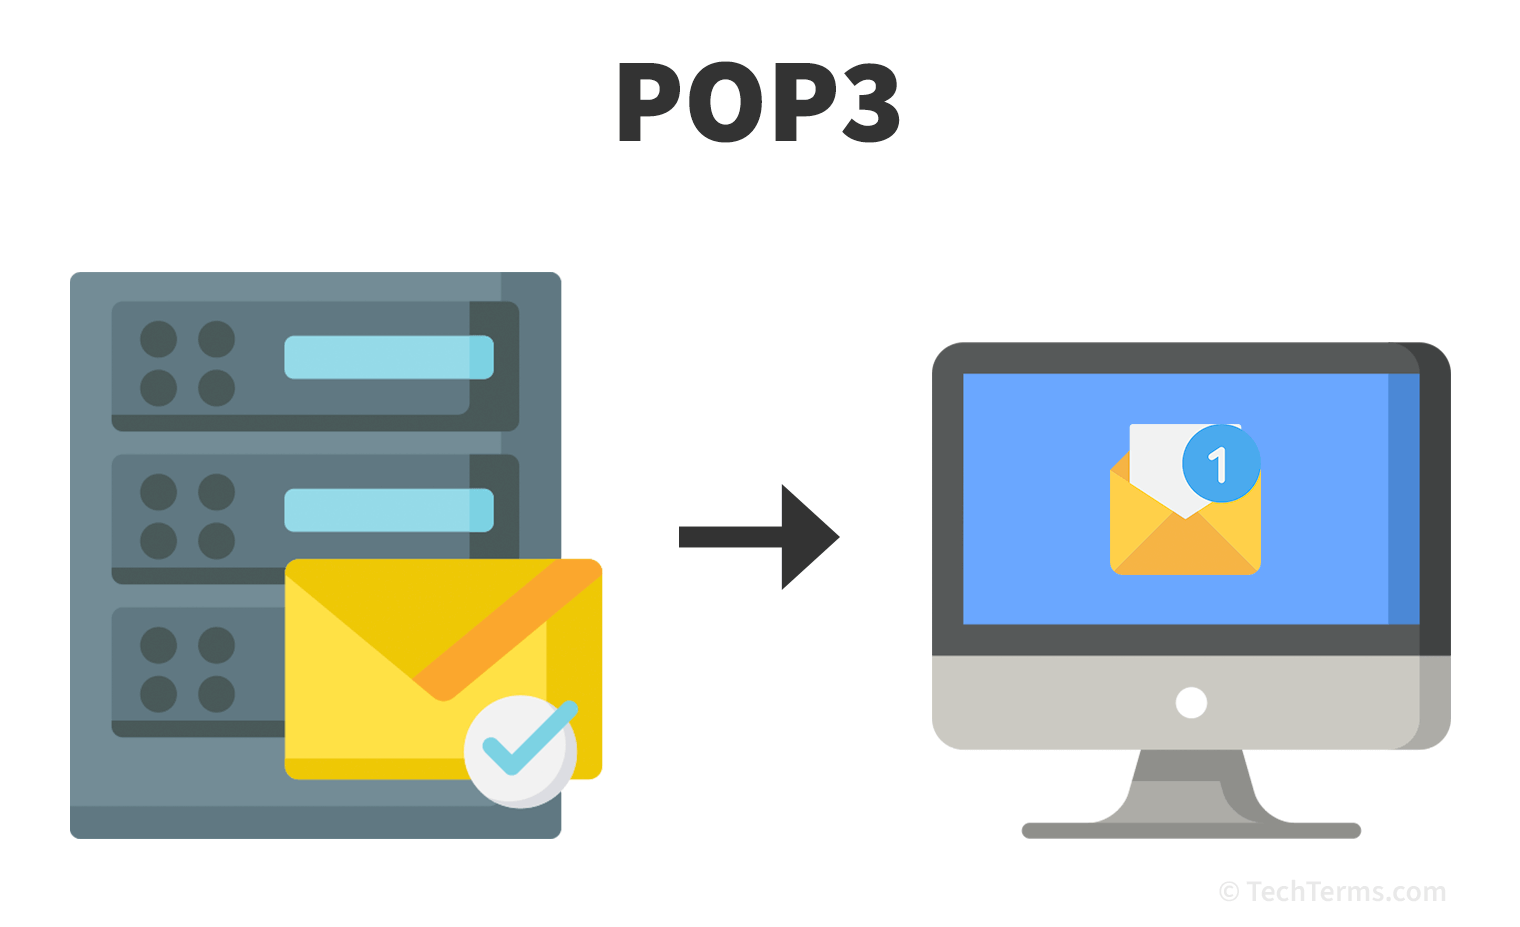 POP3 downloads email messages and removes them from the server